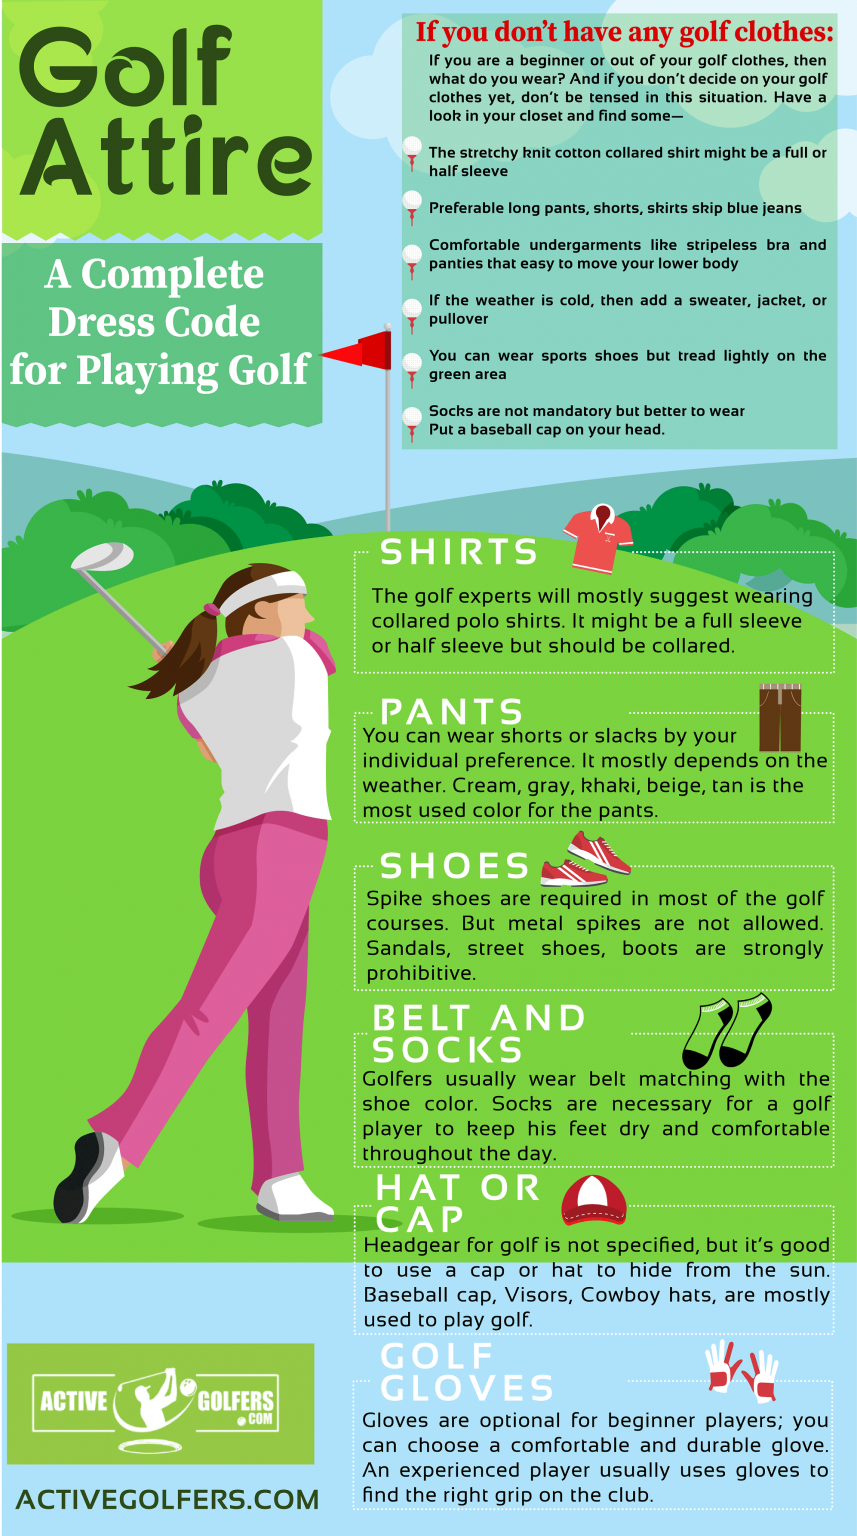 Golf Attire: A Complete Dress Code for Playing Golf